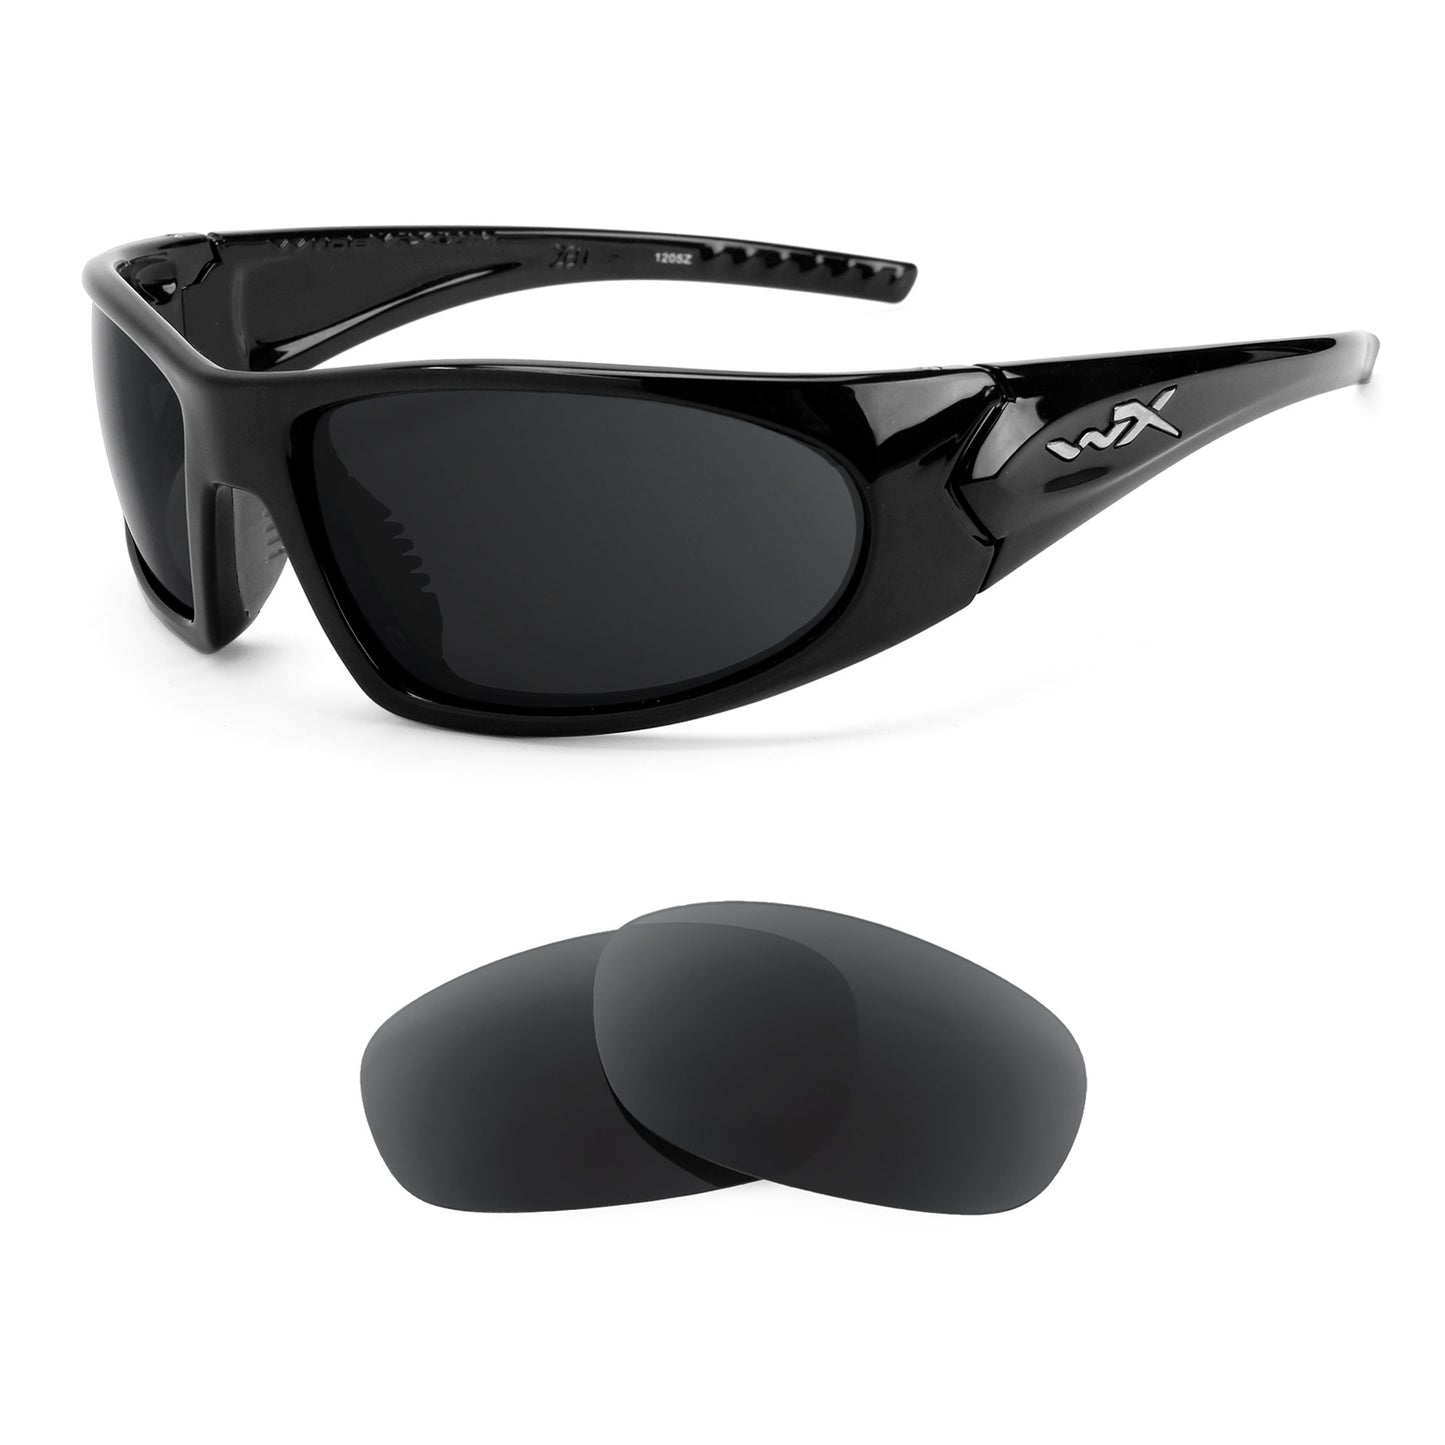 Wiley X Zen sunglasses with replacement lenses